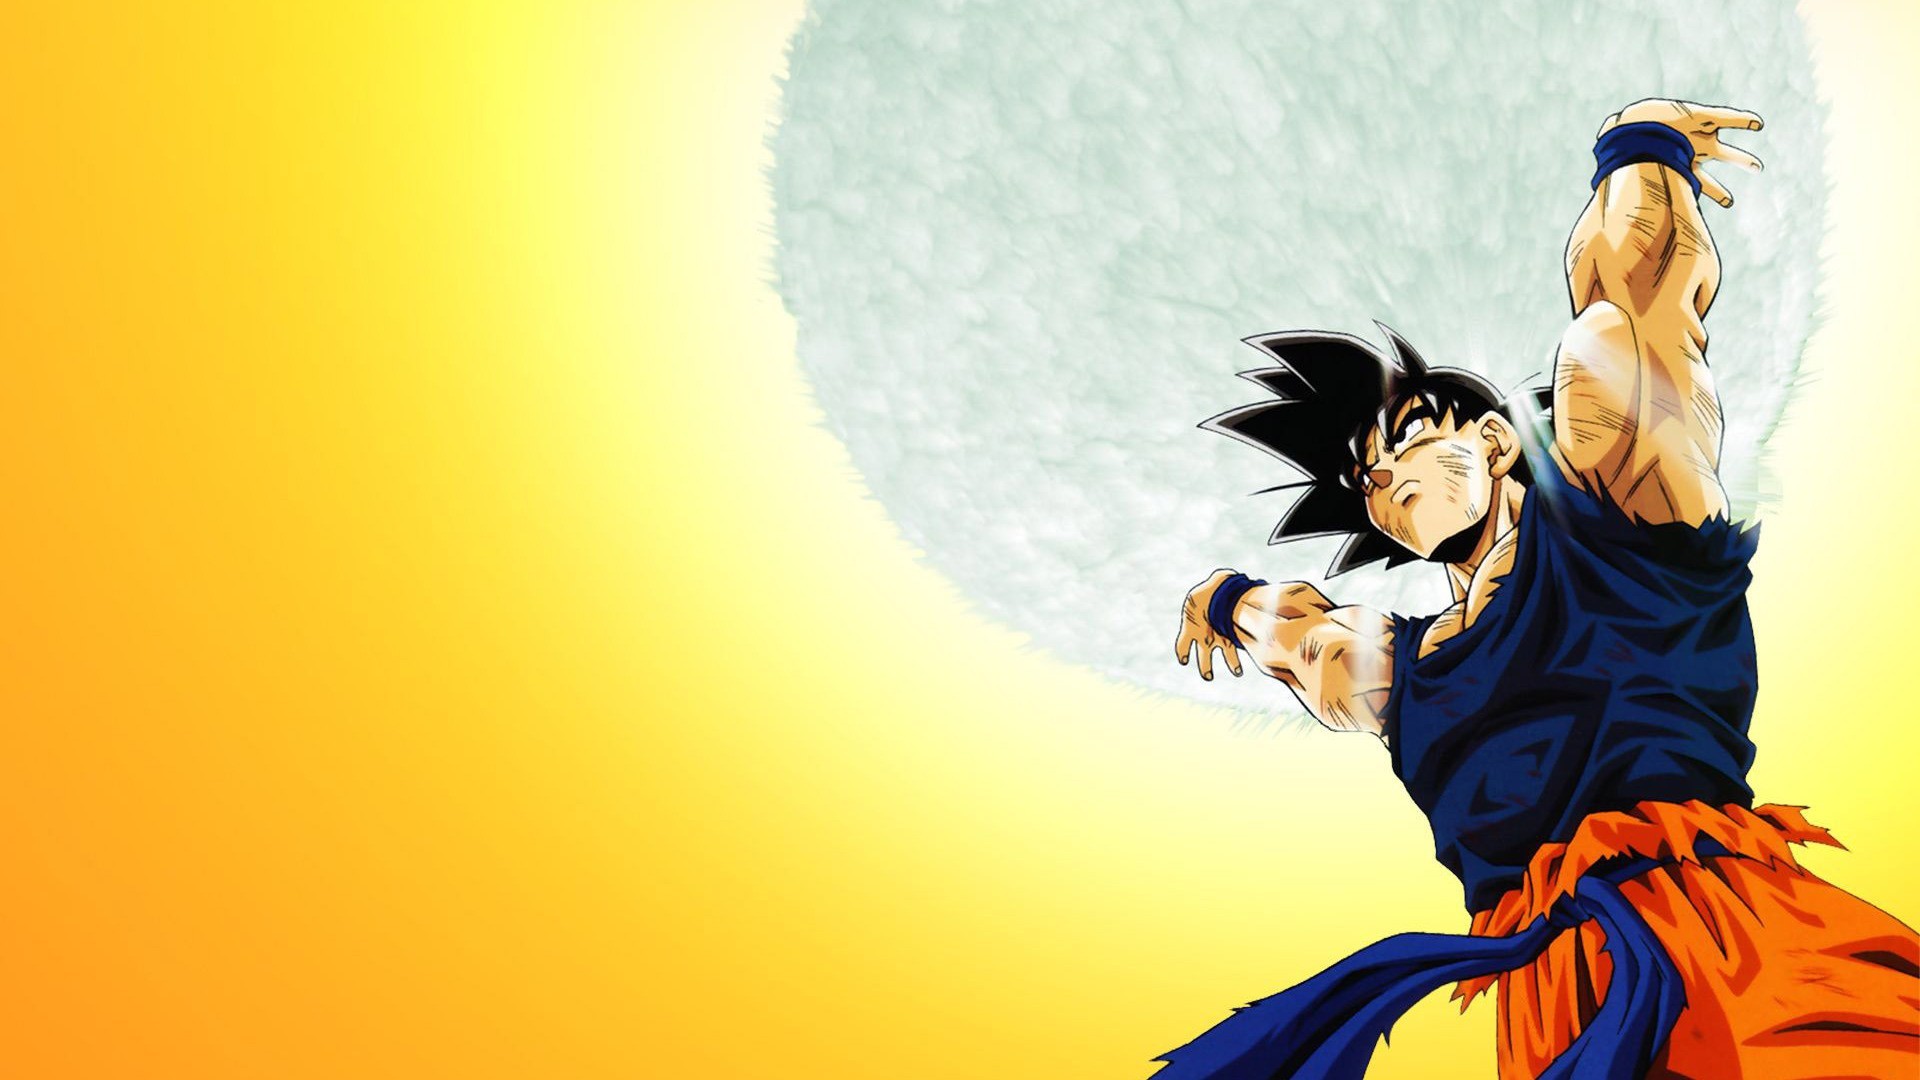 Goku Imagenes Wallpaper For Desktop with resolution 1920X1080 pixel. You can use this wallpaper as background for your desktop Computer Screensavers, Android or iPhone smartphones